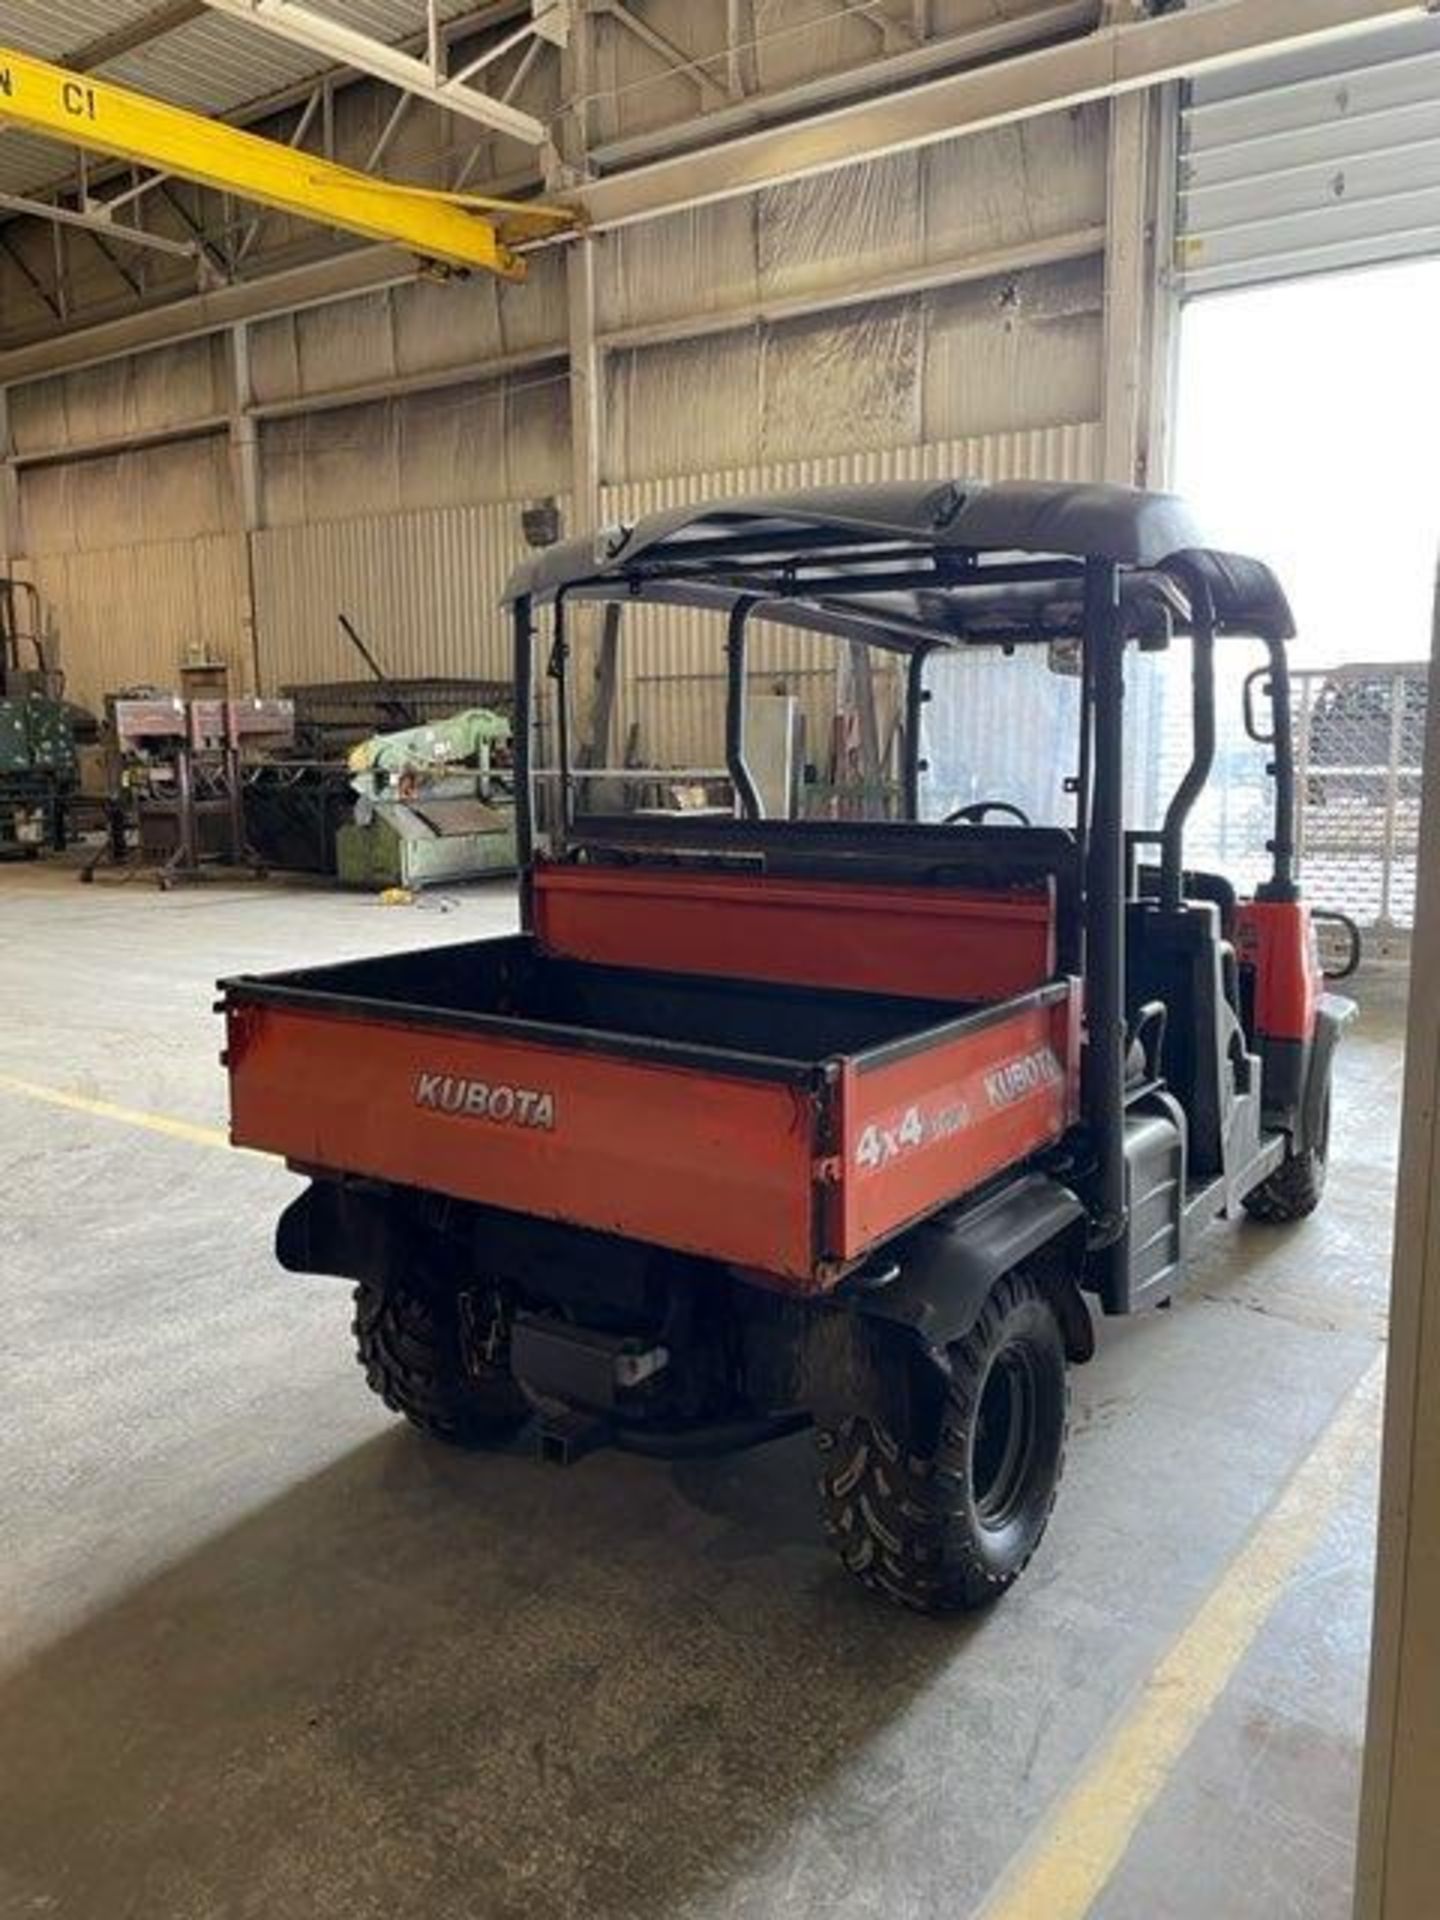 KUBOTA RTV1140 CPX DIESEL UTILITY VEHICLE, 2-ROW COLLAPSIBLE SEATING, CANOPY WITH FRONT - Image 3 of 7